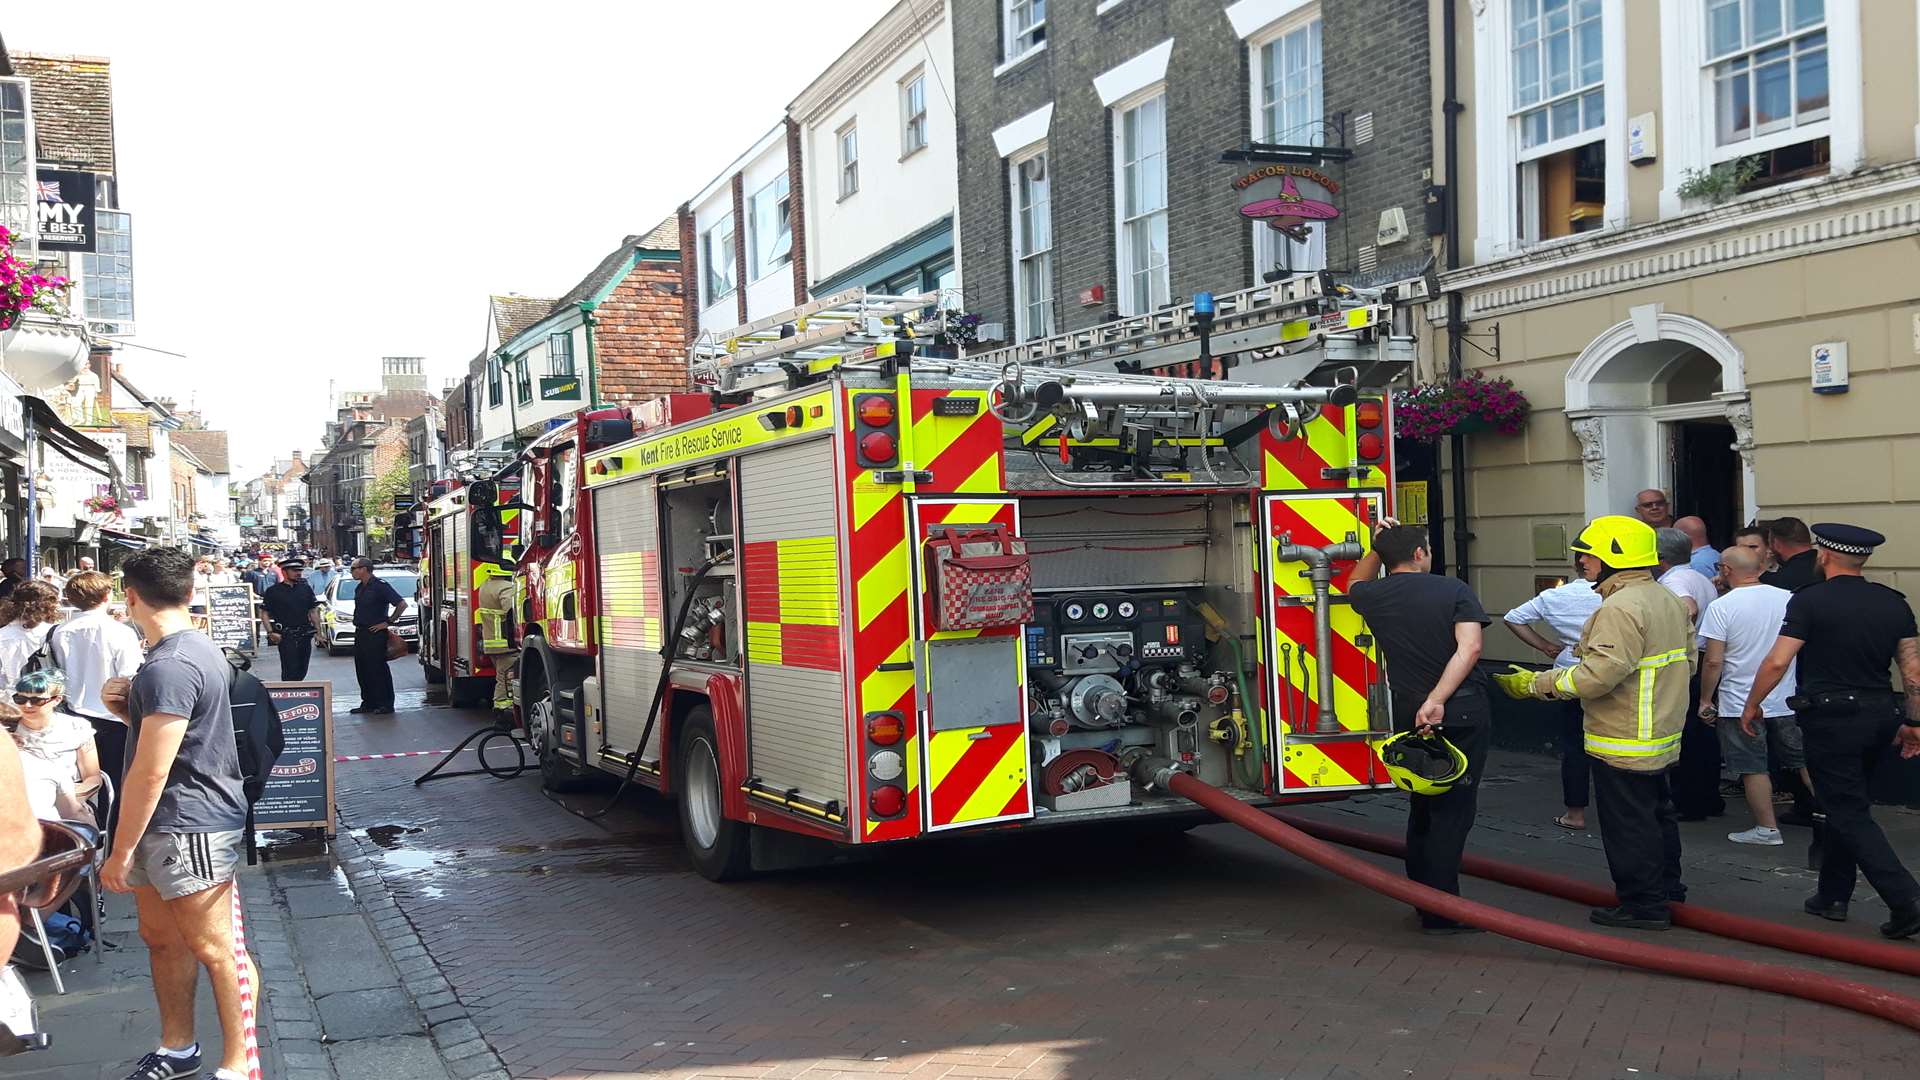 The scene of the fire in St Peter's Street, Canterbury